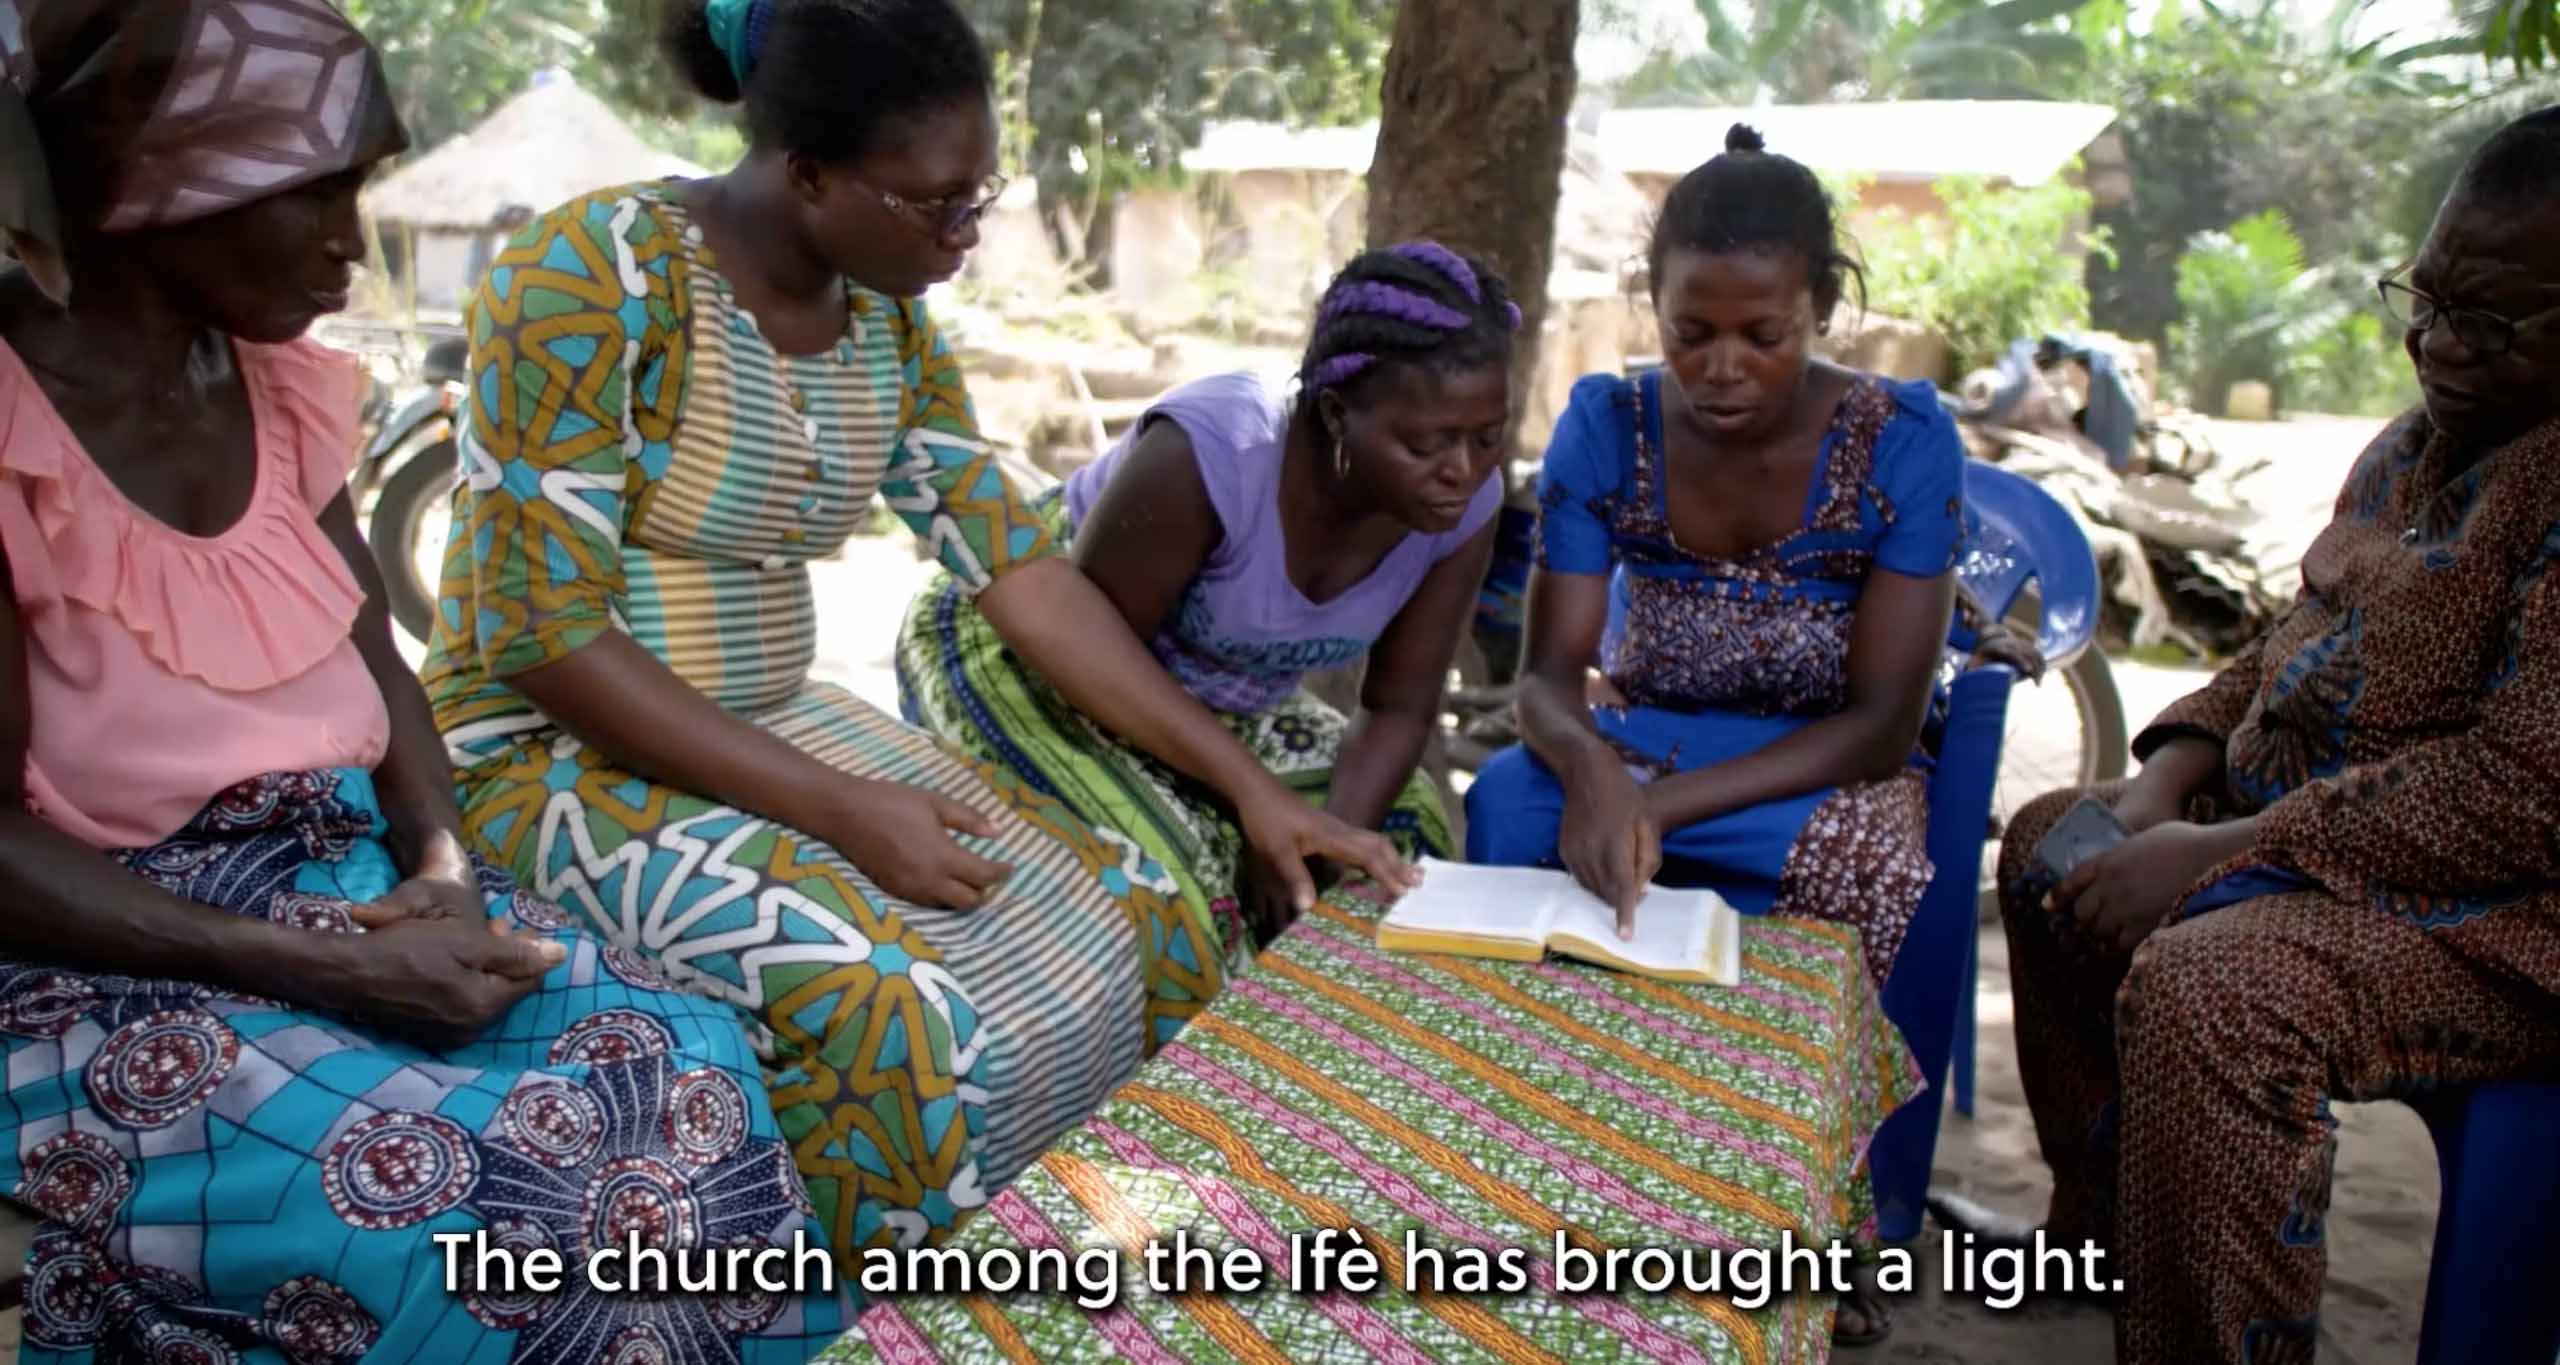 An Unfinished Task: Translating The Full Bible for the Ifè People in Togo